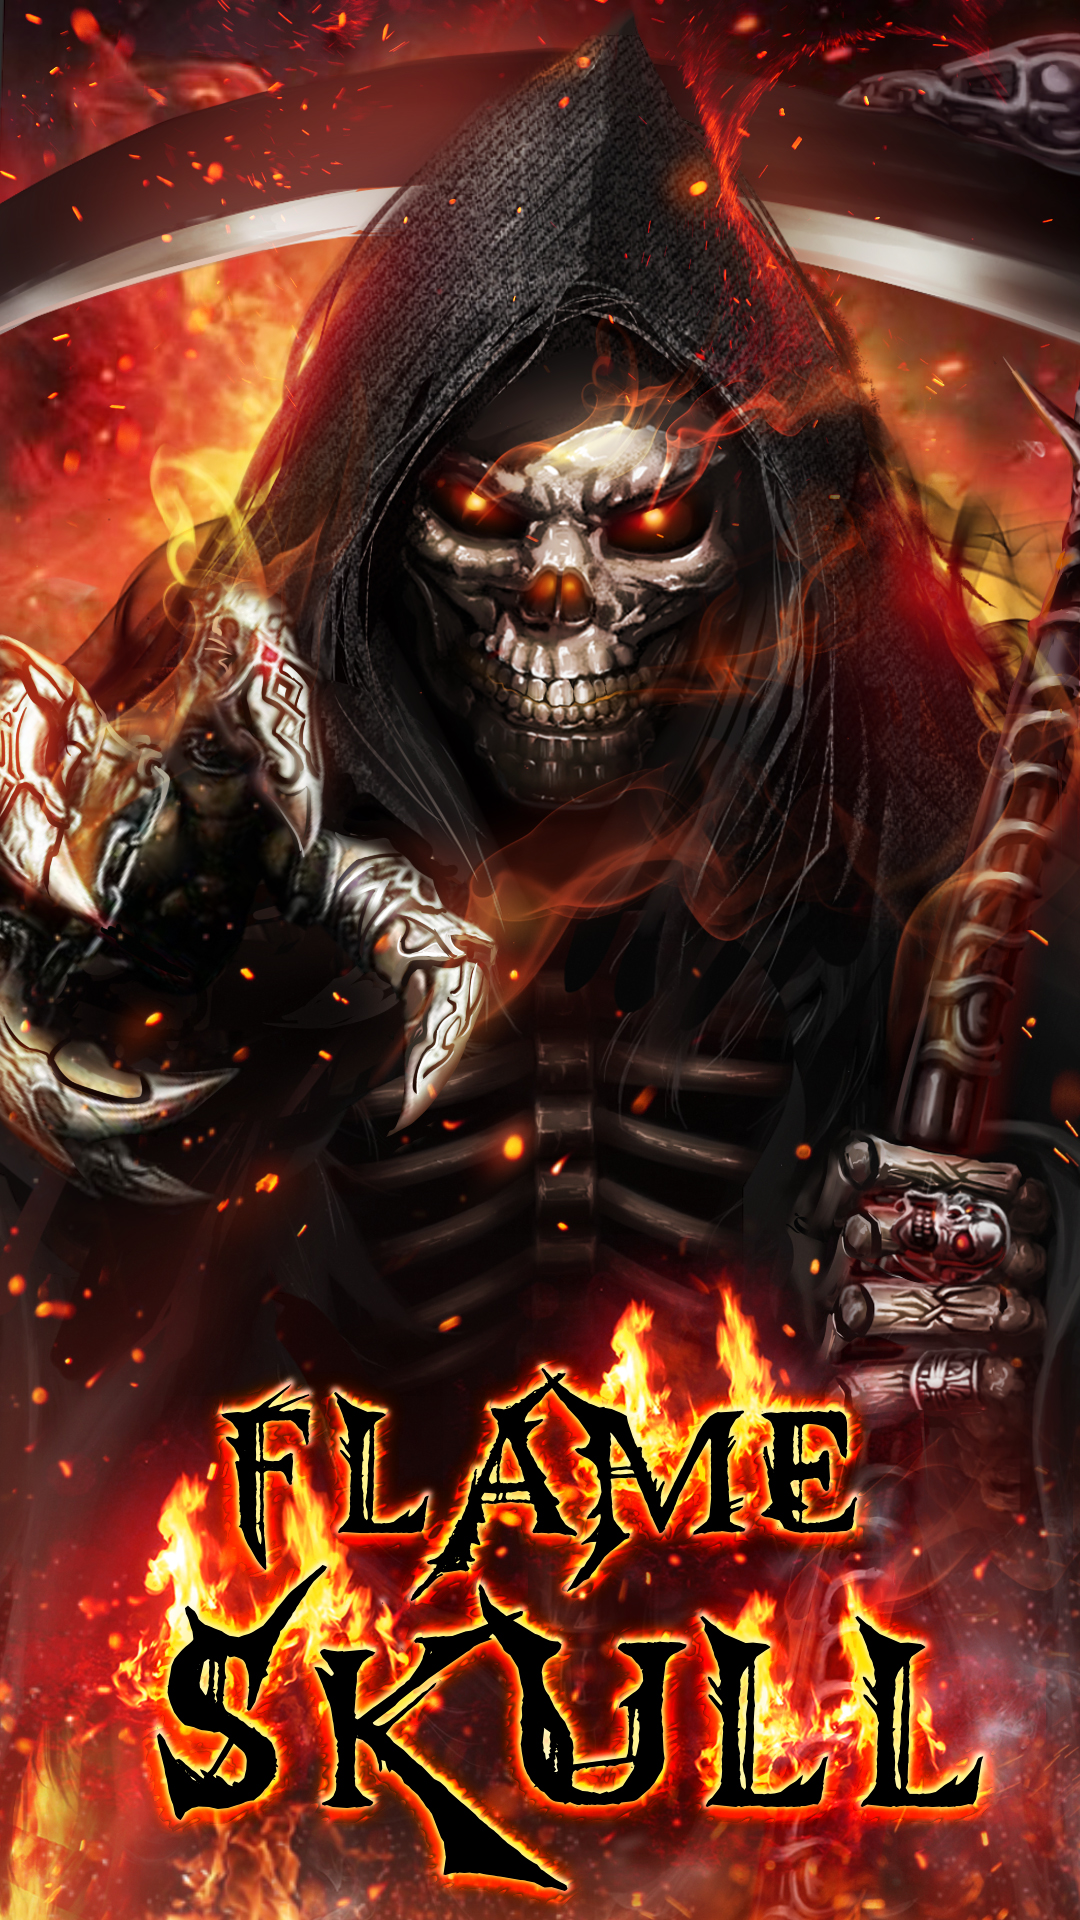 Badass Wallpapers For Android 05 0f 40 Grim Reaper Flame Skull - HD